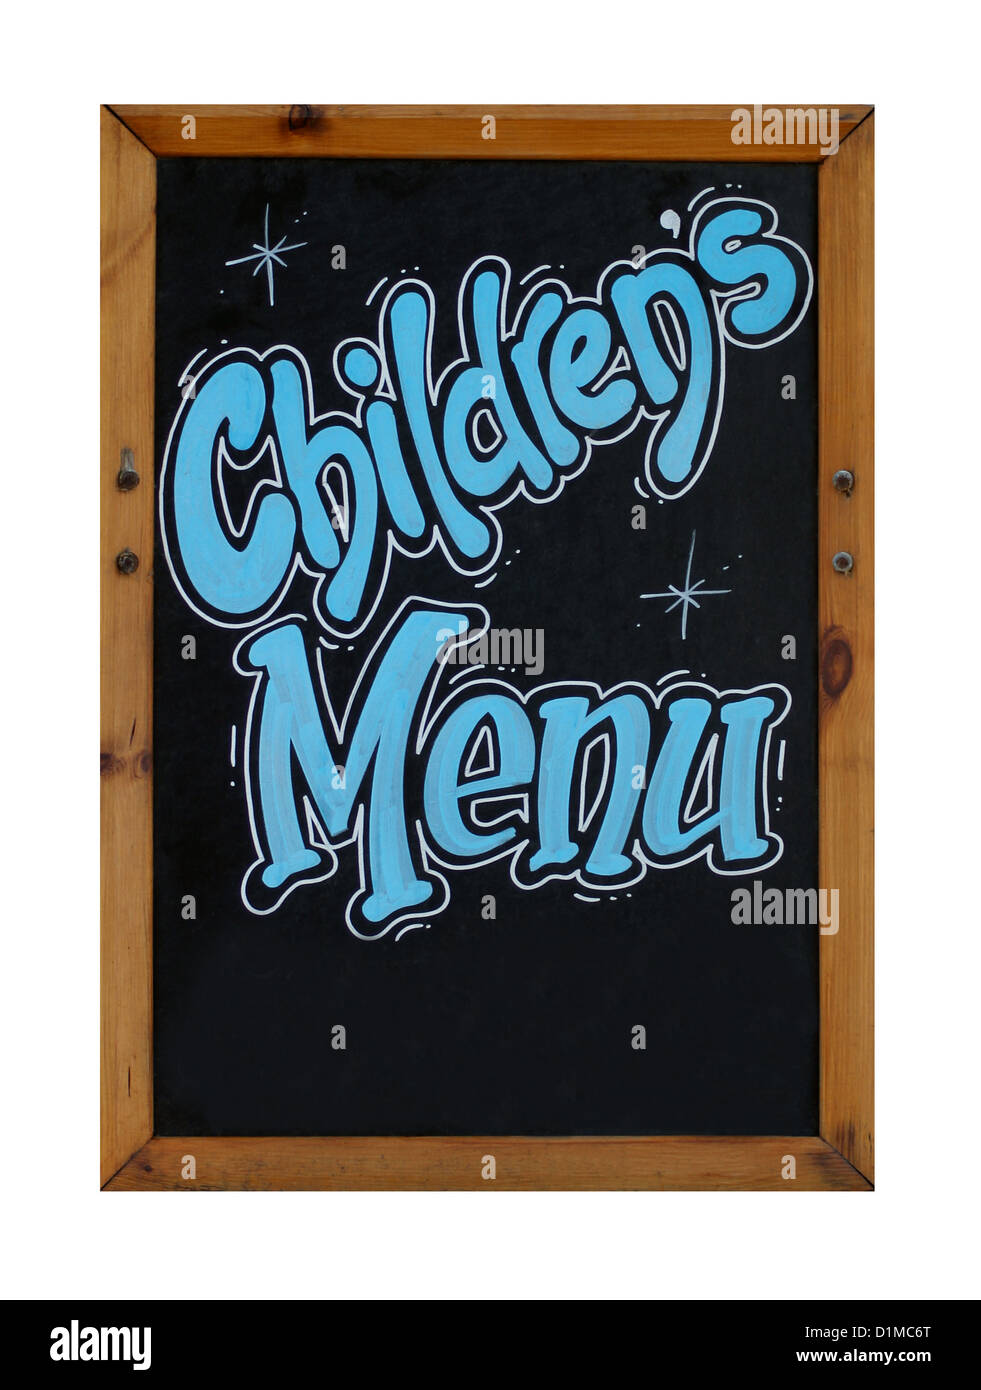 Childrens menu sign on blackboard or chalkboard isolated on white background. Stock Photo